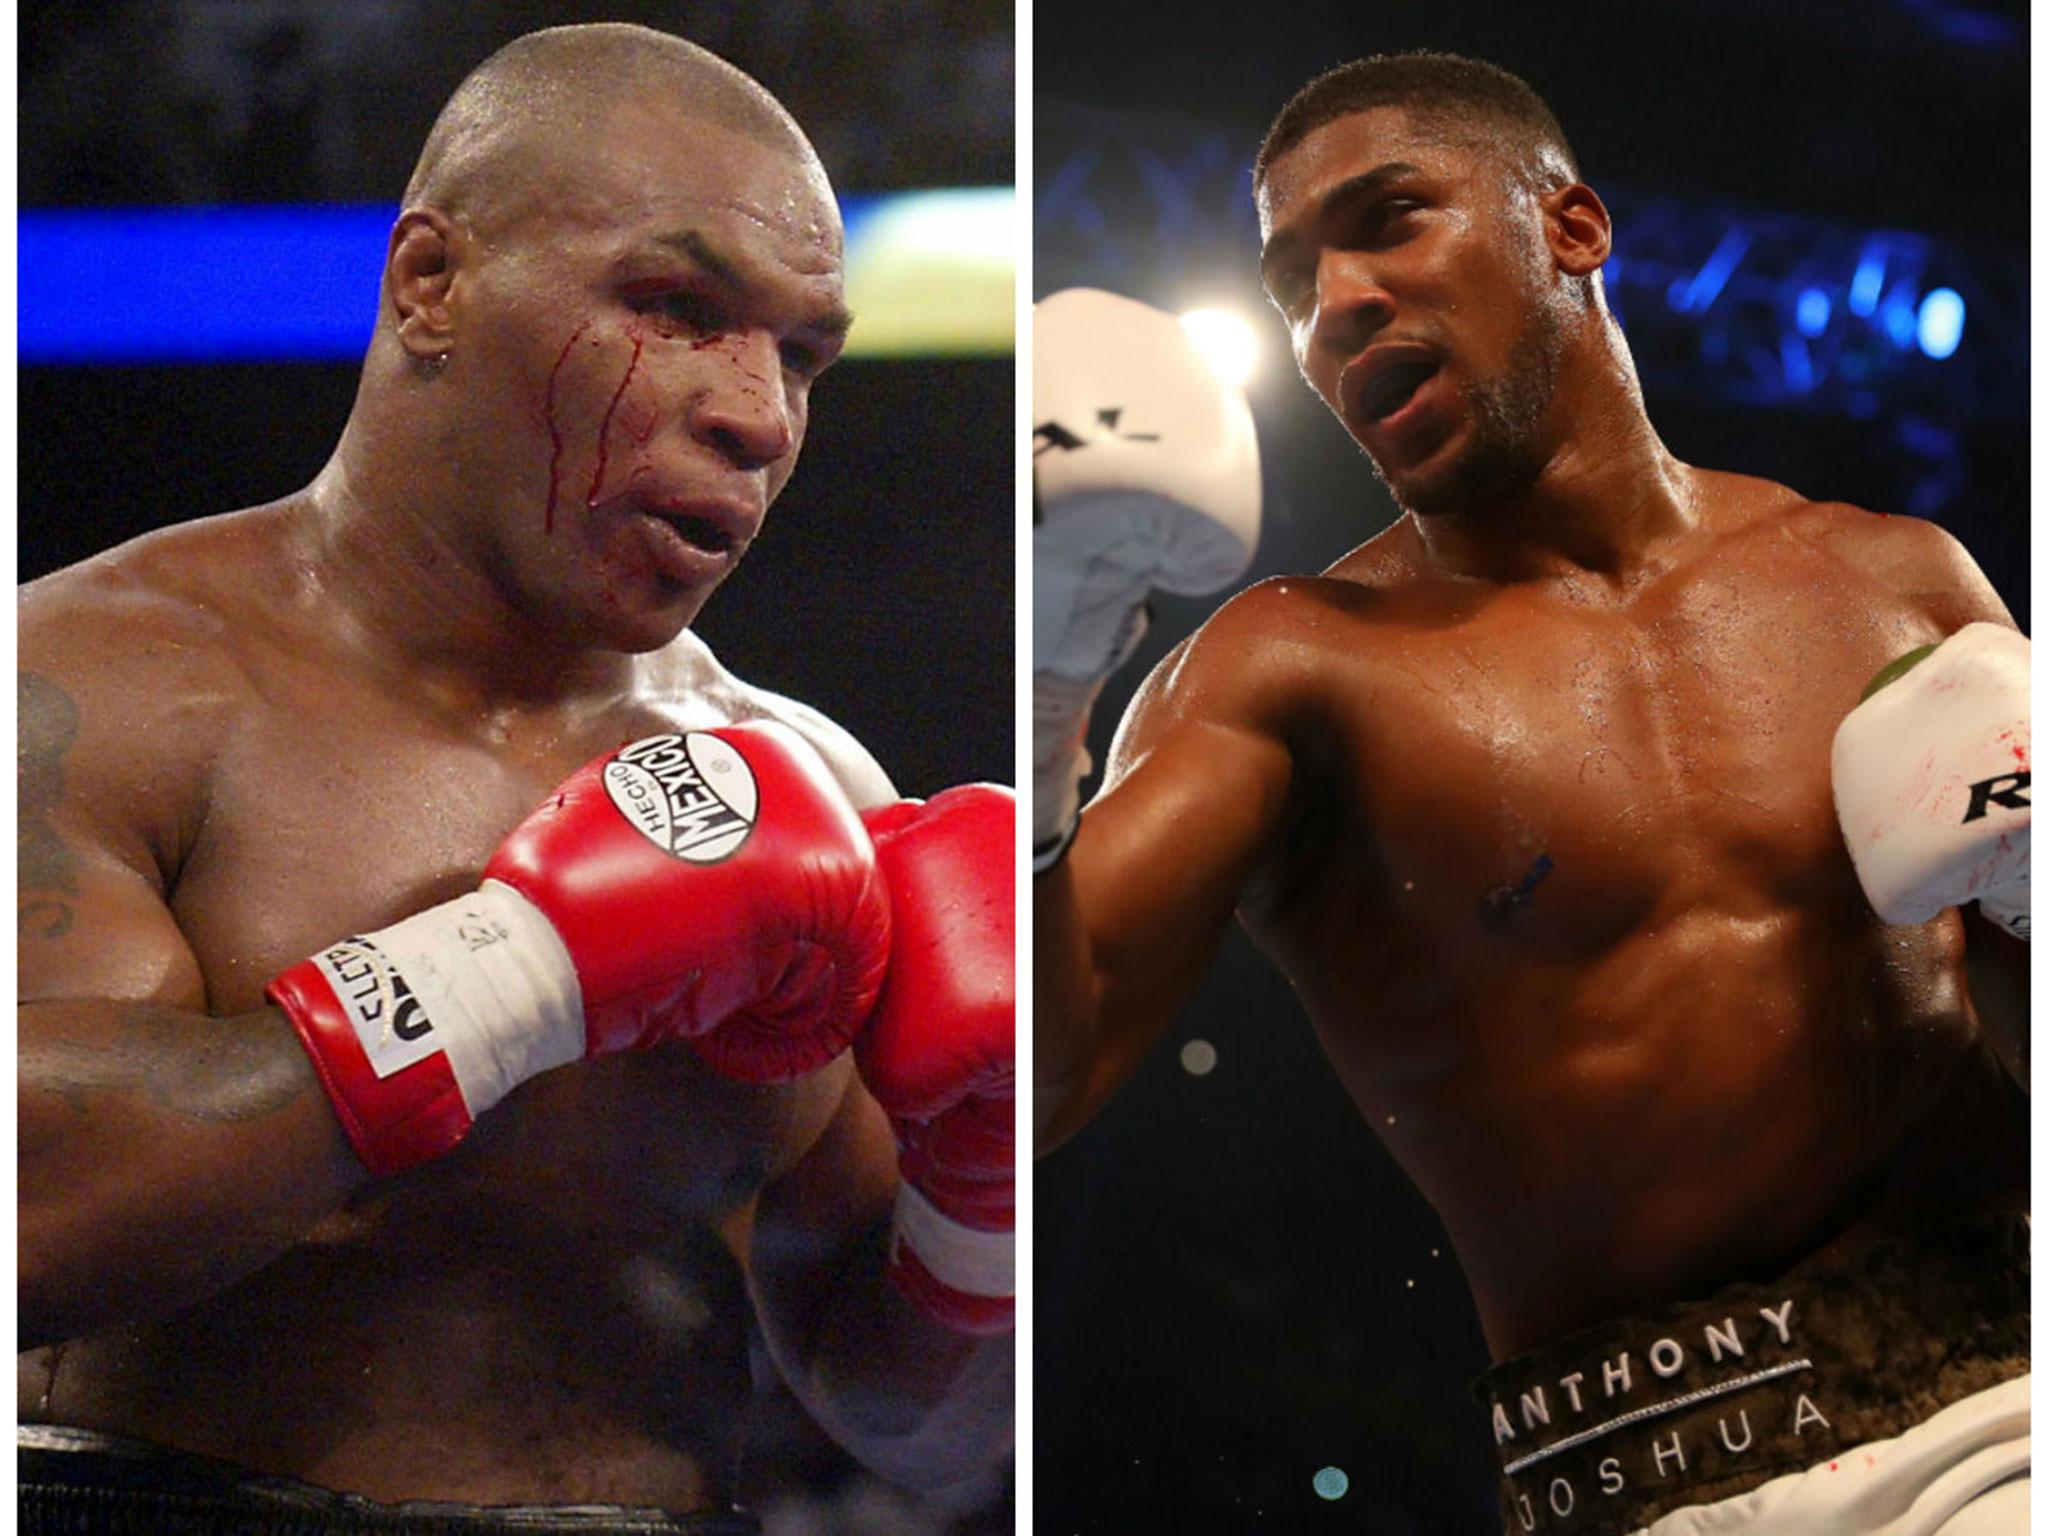 Mike Tyson and Anthony Joshua both rejuvenated the heavyweight category